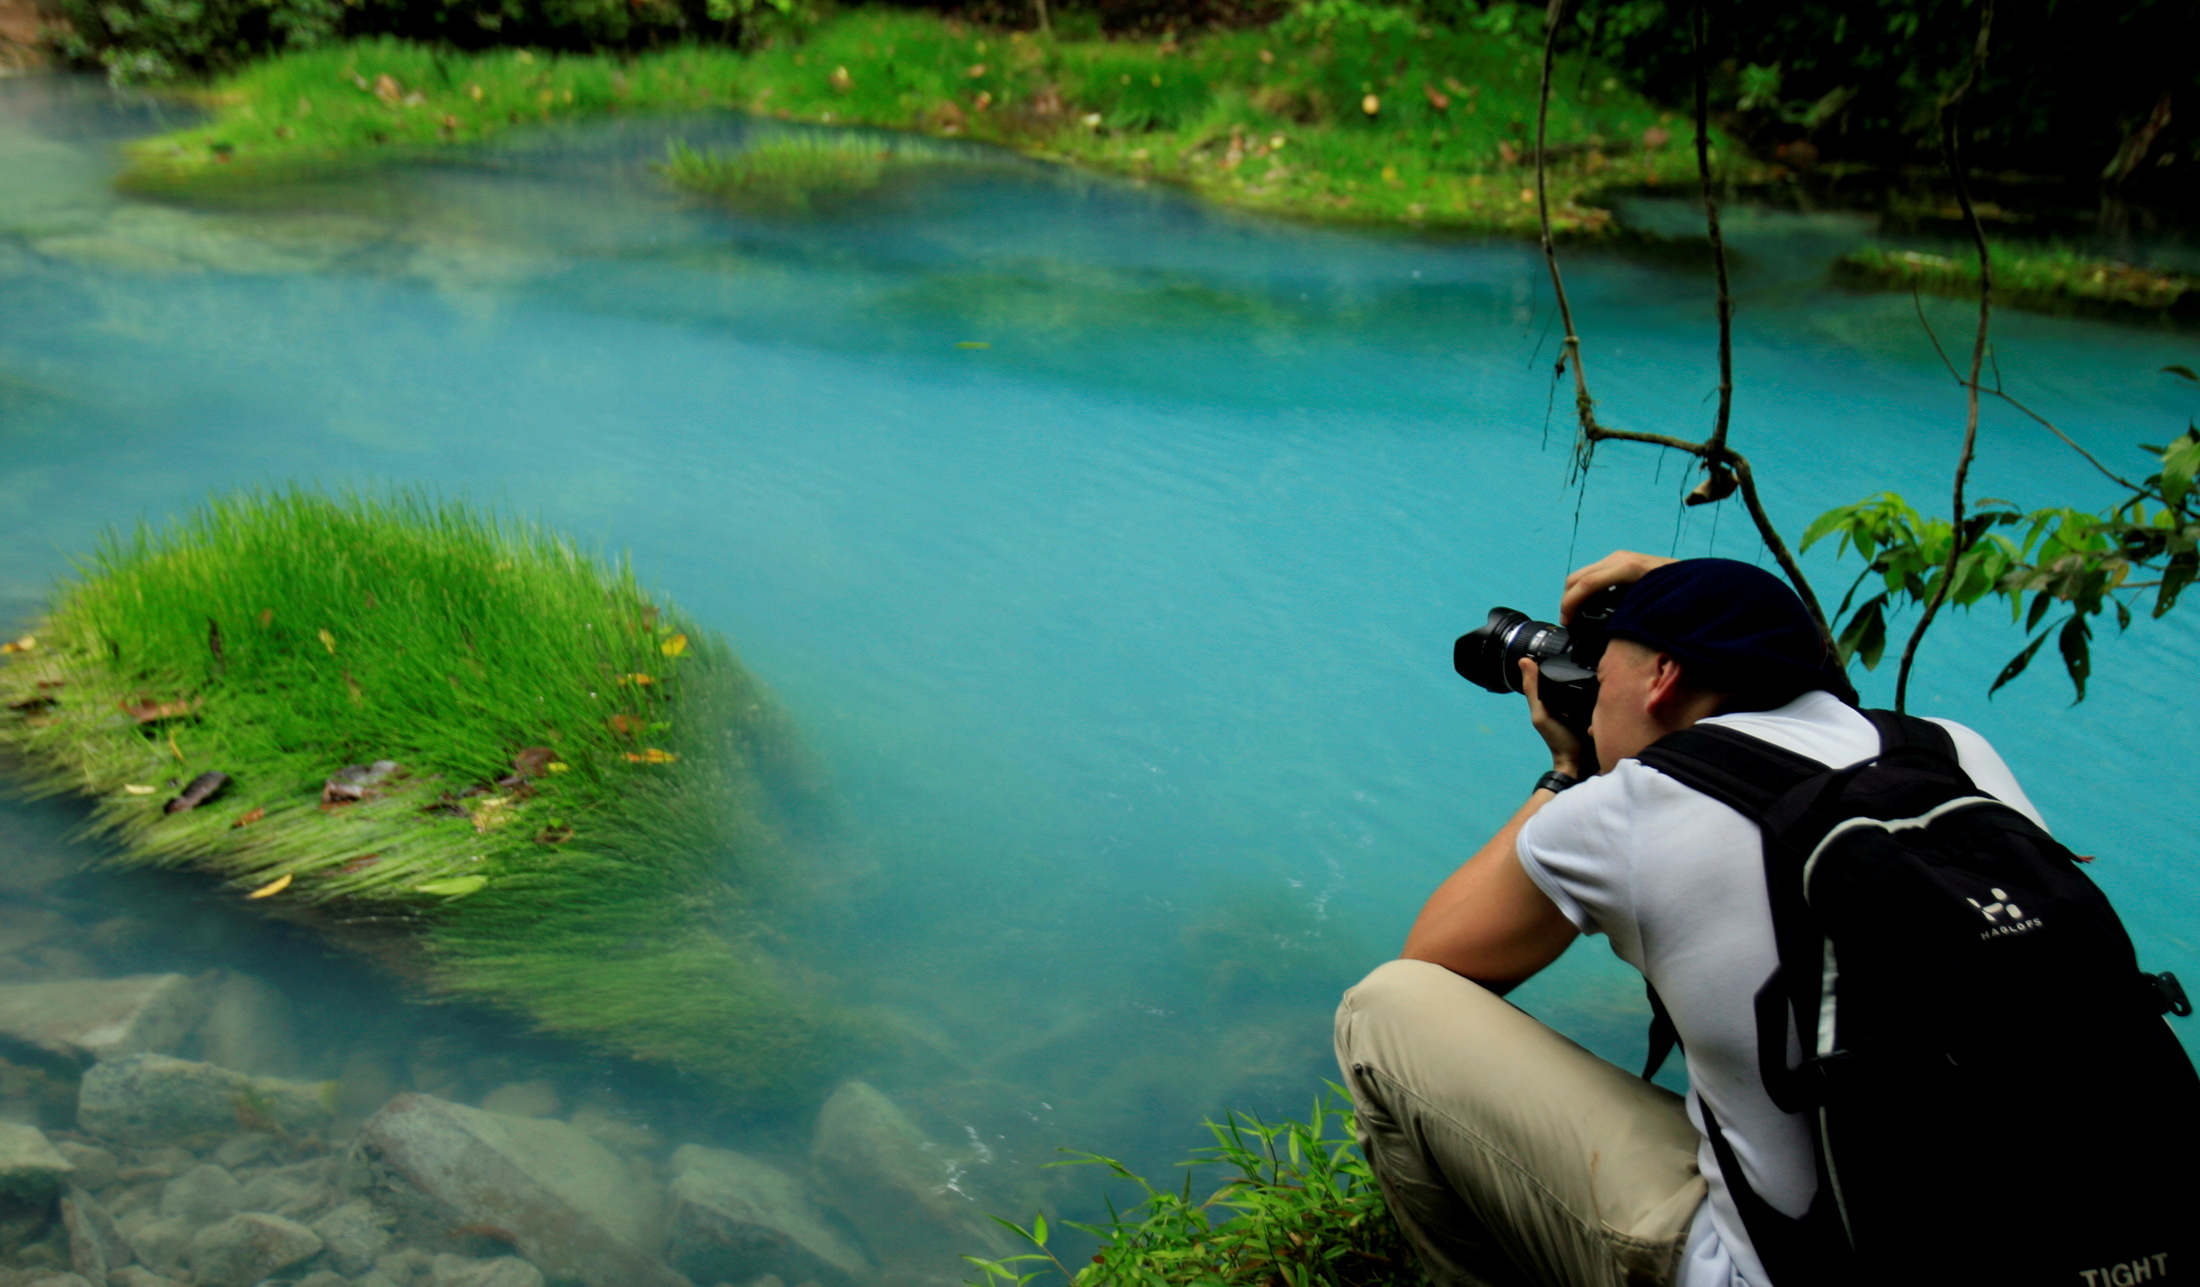 A tourist takes pictures of a blue lagoon at Tenorio Volcano National Park in Upala March 18, 2008. The blue color of the lagoon, formed from chemical reactions of calcium carbonate and sulfur, is surrounded by an amazing rainforest that constitutes 12,819 hectares of this park. REUTERS/Juan Carlos Ulate (COSTA RICA)